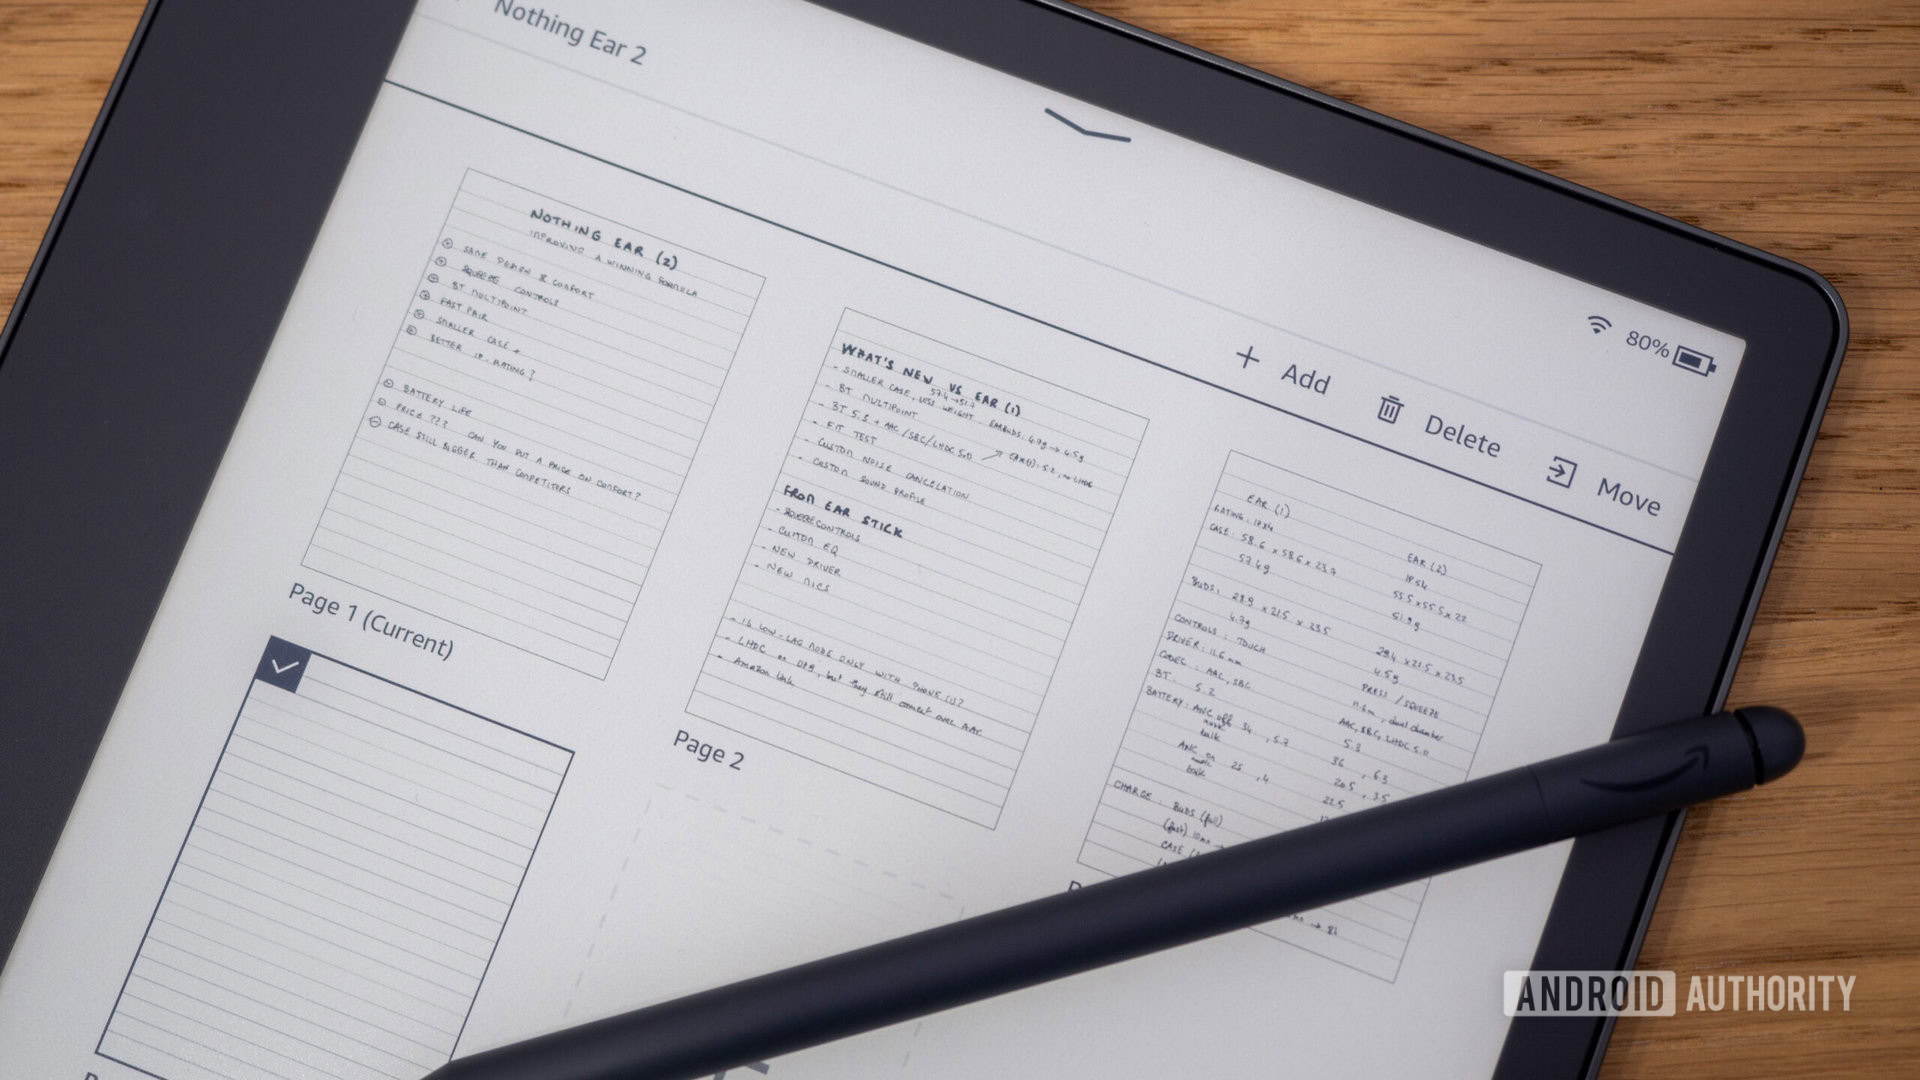 improves Kindle Scribe for serious notetaking, says there's